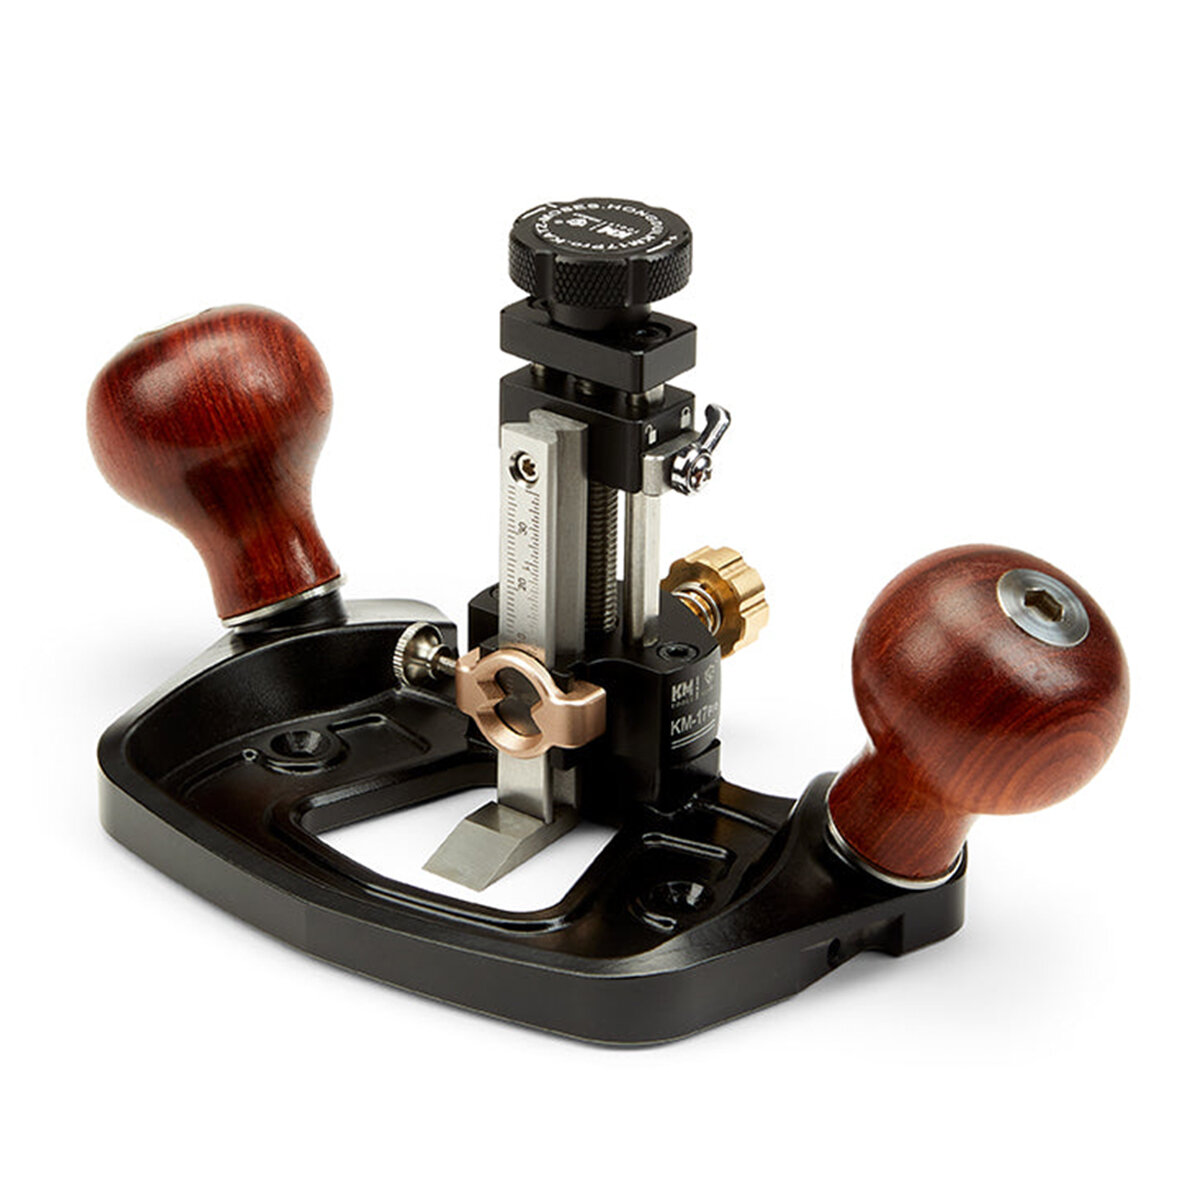 Image of HONGDUI KM-17 Pro Router Plane Die Steel Body Adjustable Fence with CAM Lock Depth Stop Dual Blade 1/2inches width For F